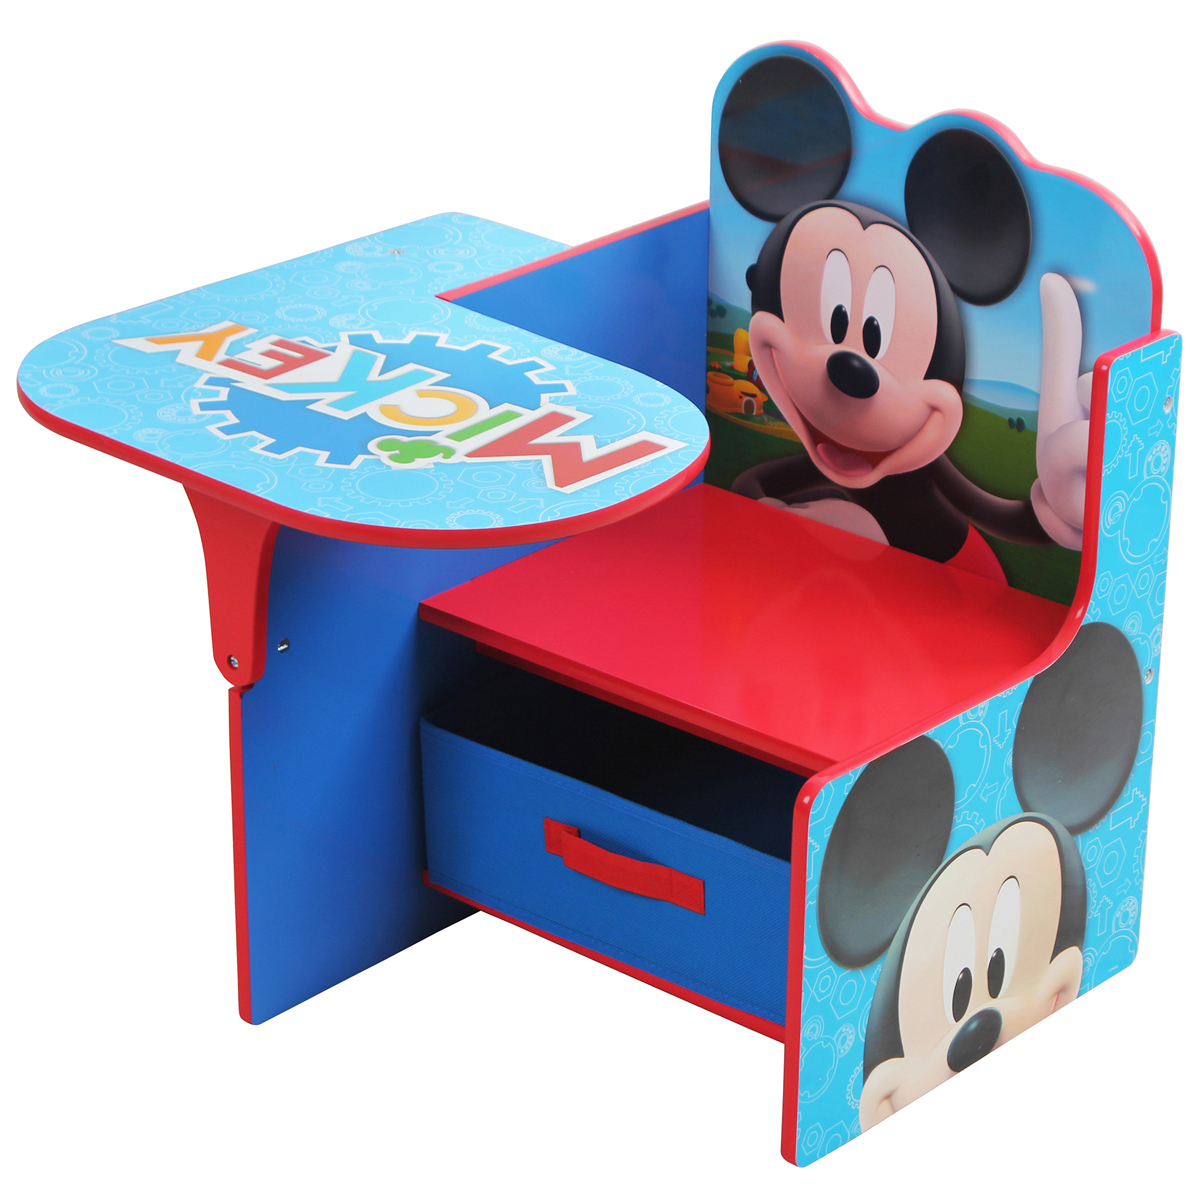 Mickey Mouse Chair Desk with Storage Bin | Early Learning Centre